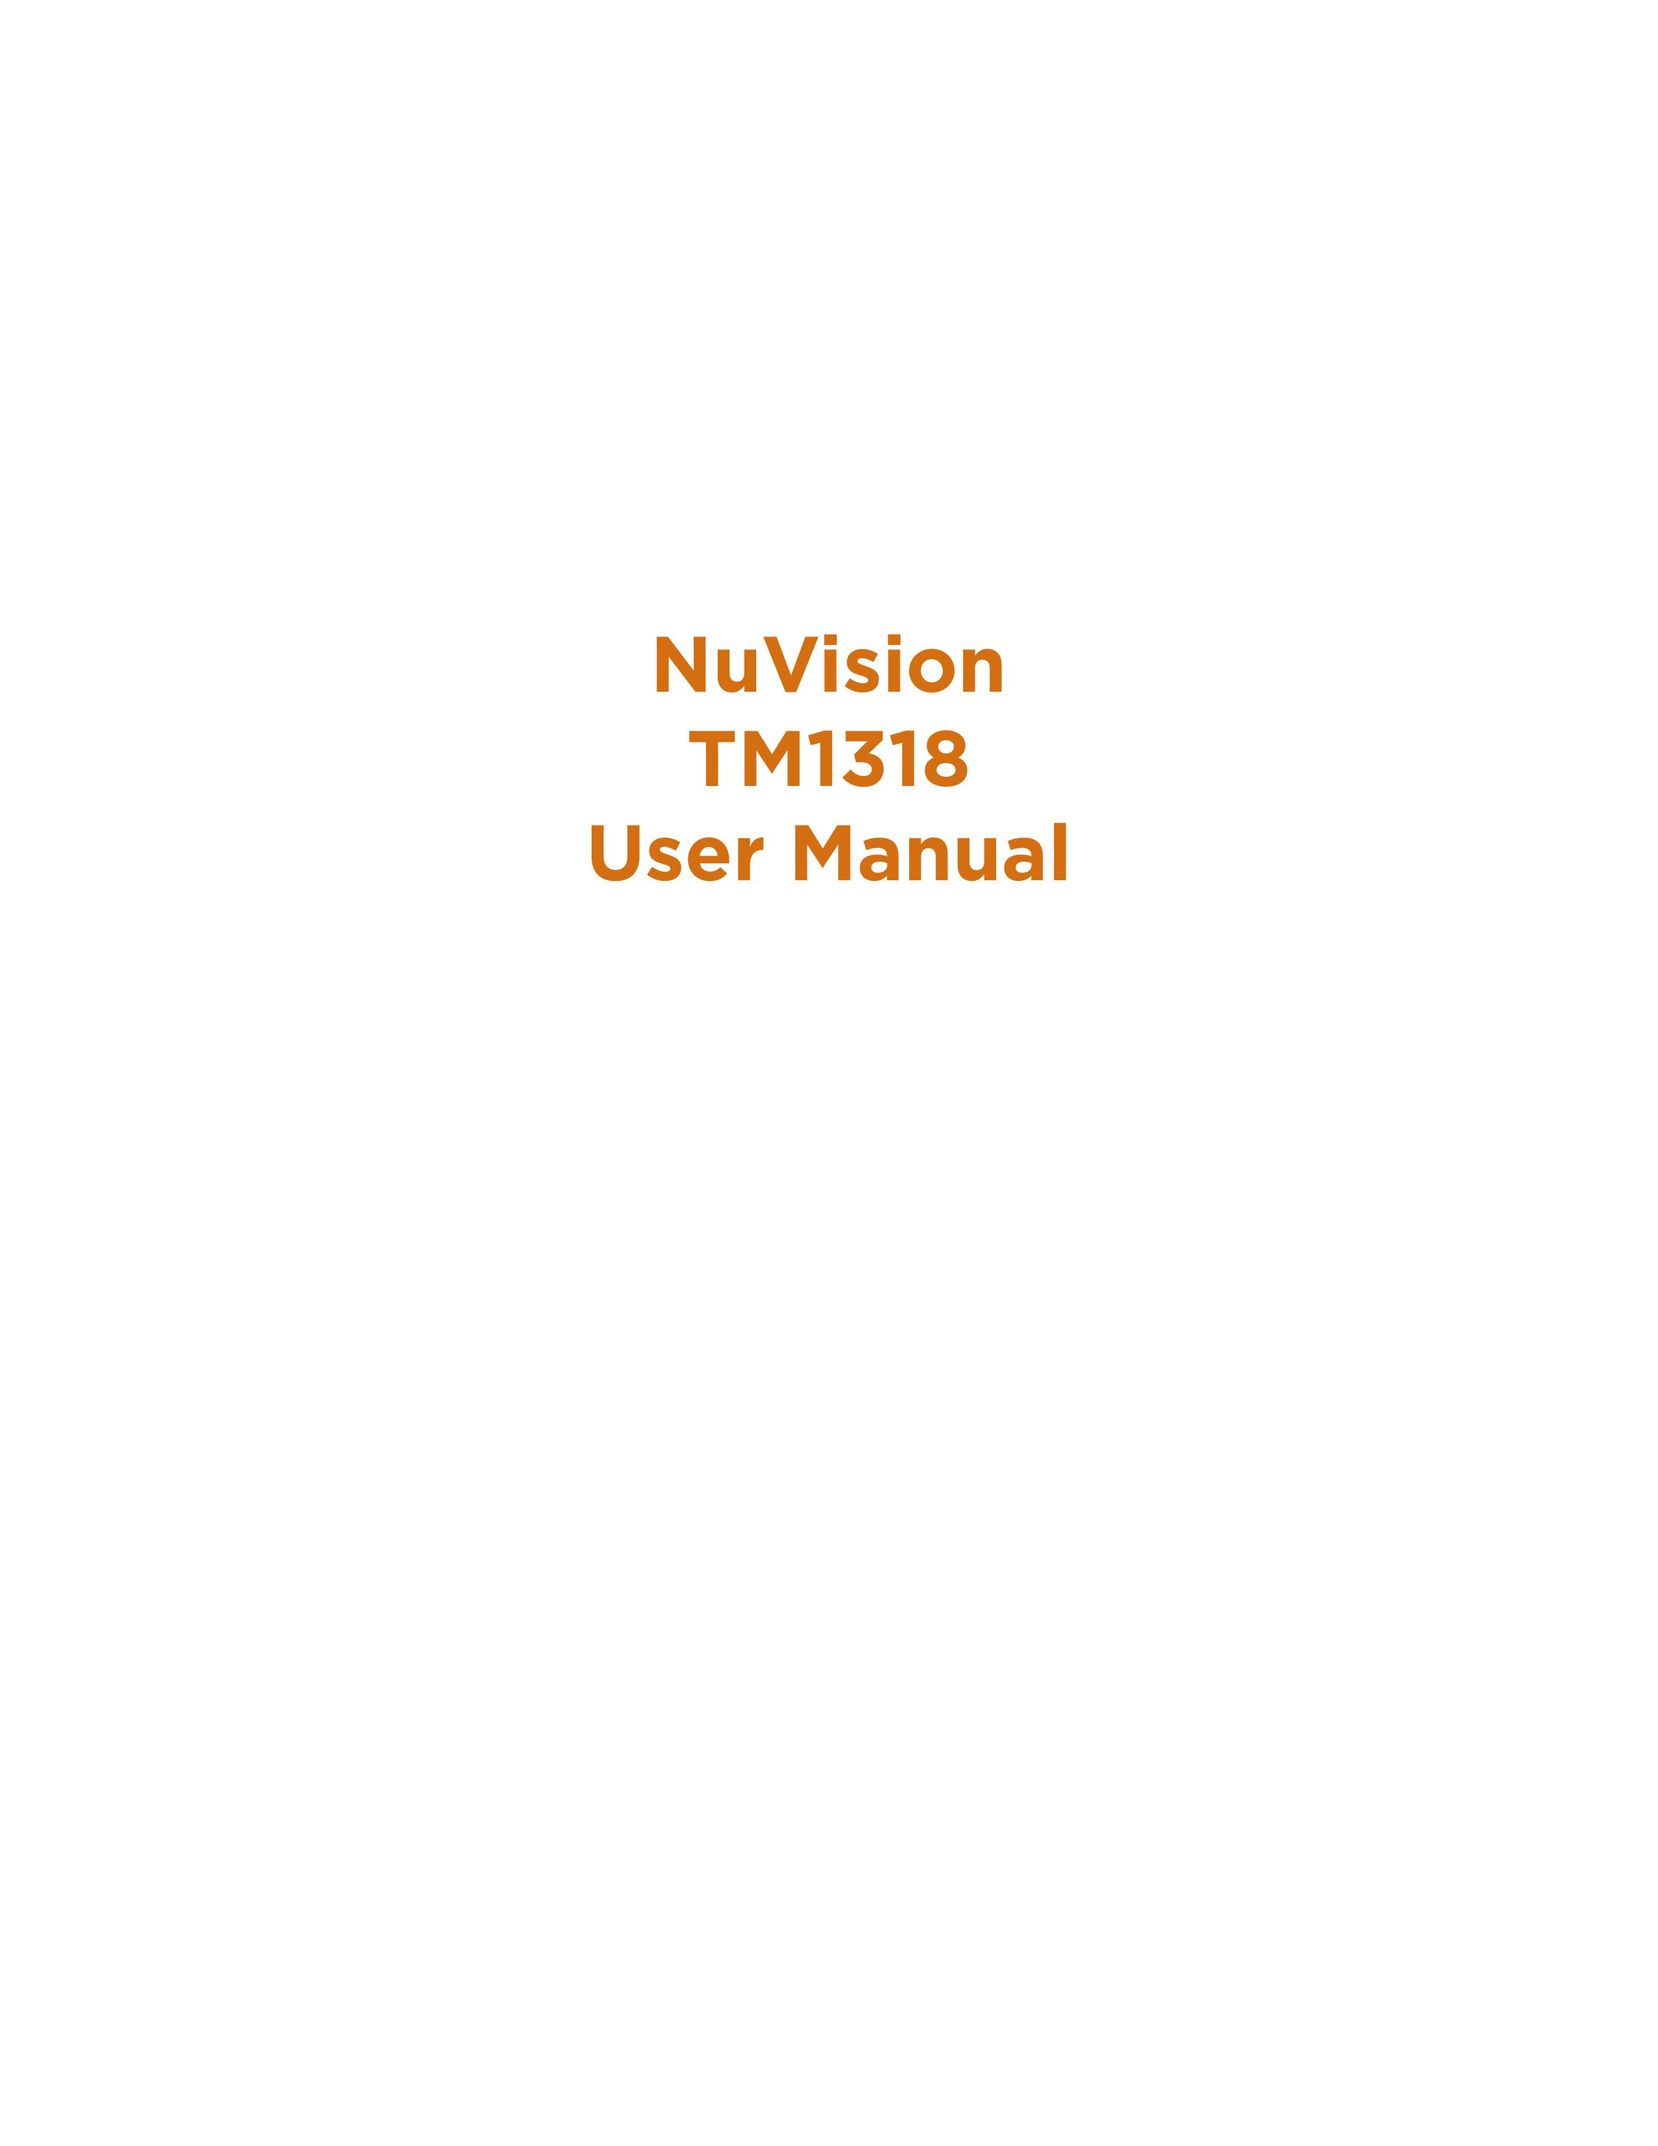 NuVision TM1218 Graphics Tablet User Manual